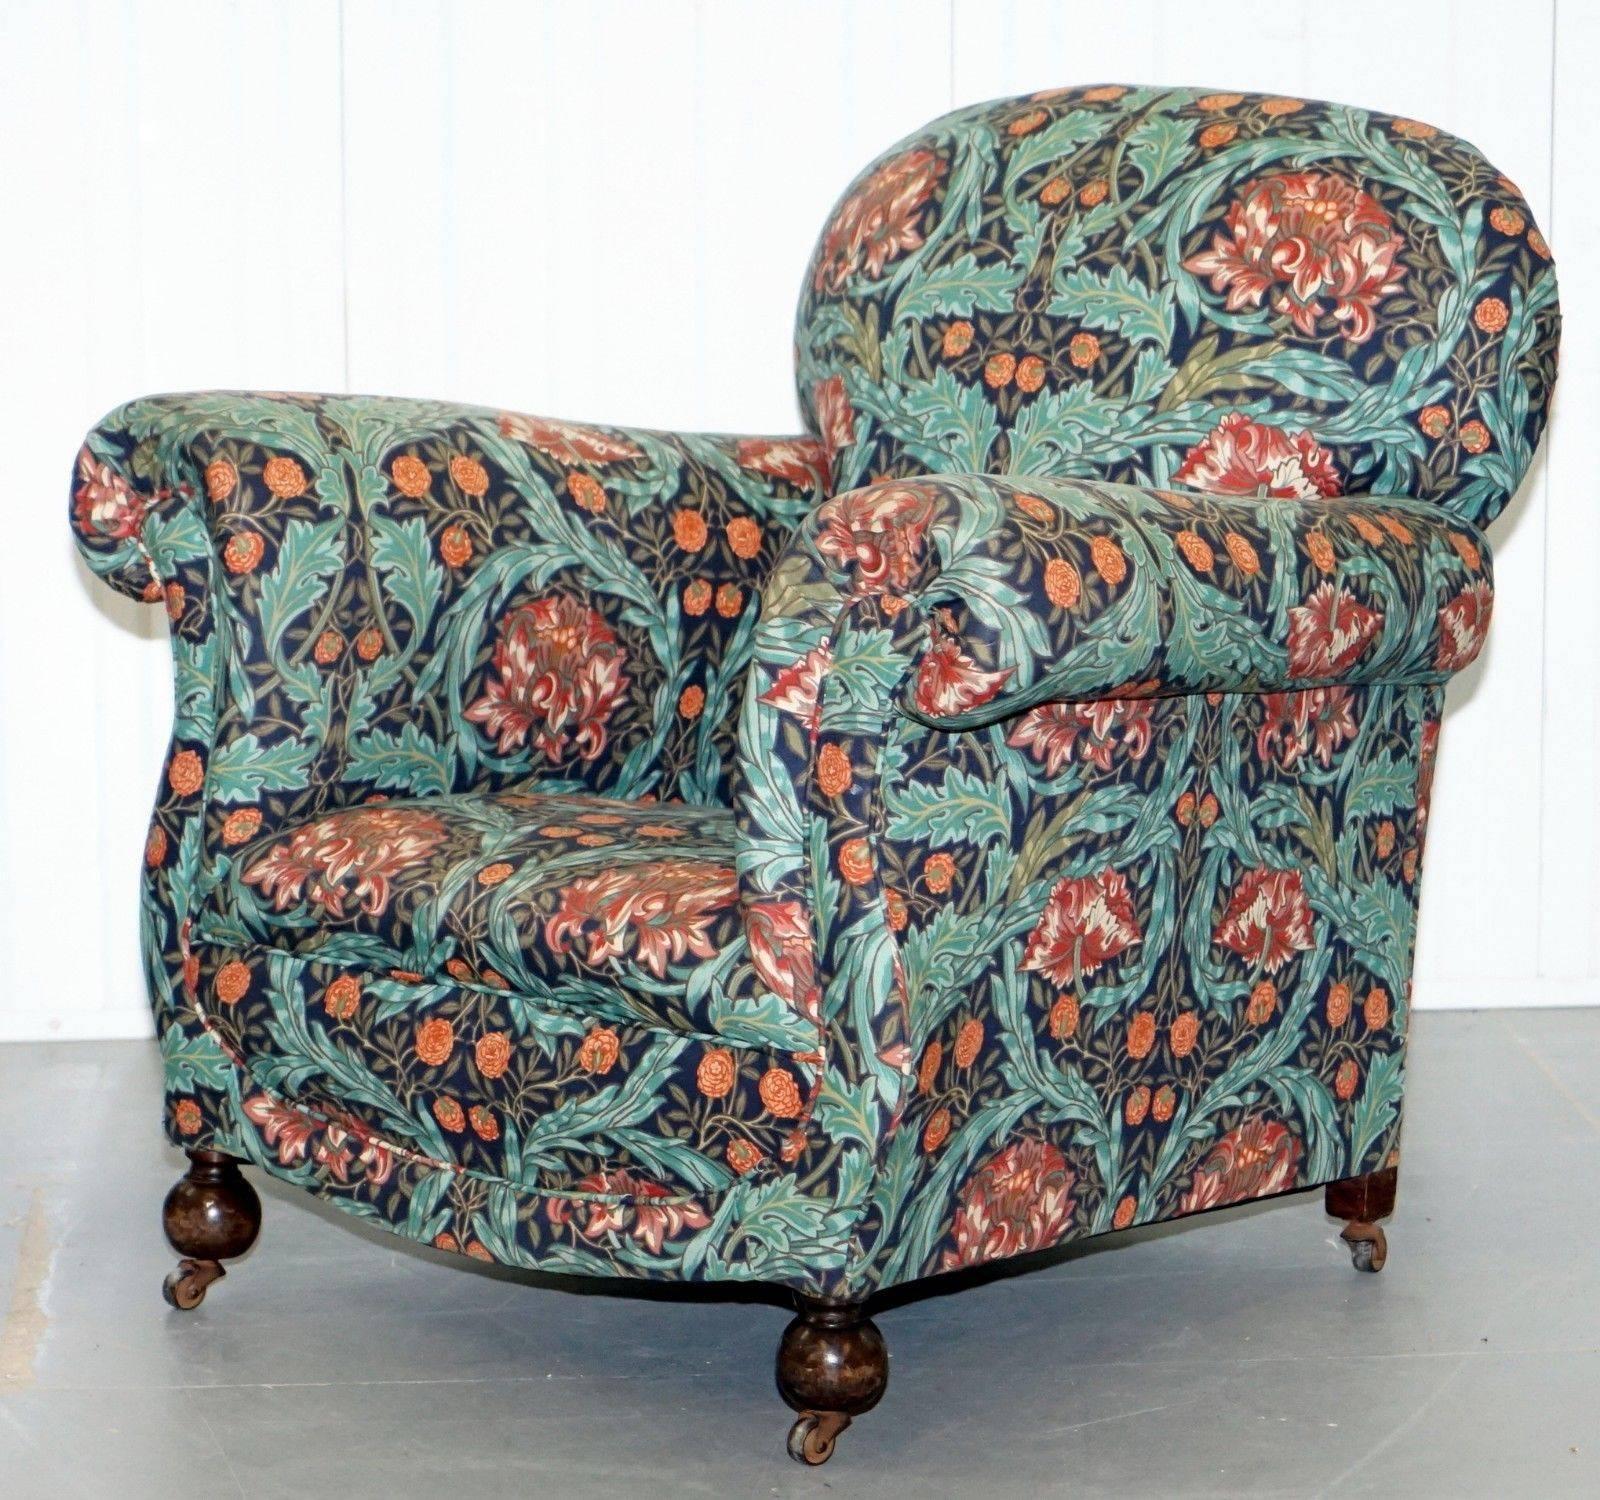 We are delighted to offer for sale this lovely pair of William Morris upholstered Victorian club armchairs part of a suite

I have included a picture of the drop arm Victorian sofa, it's not included in this listing but is listed under my other